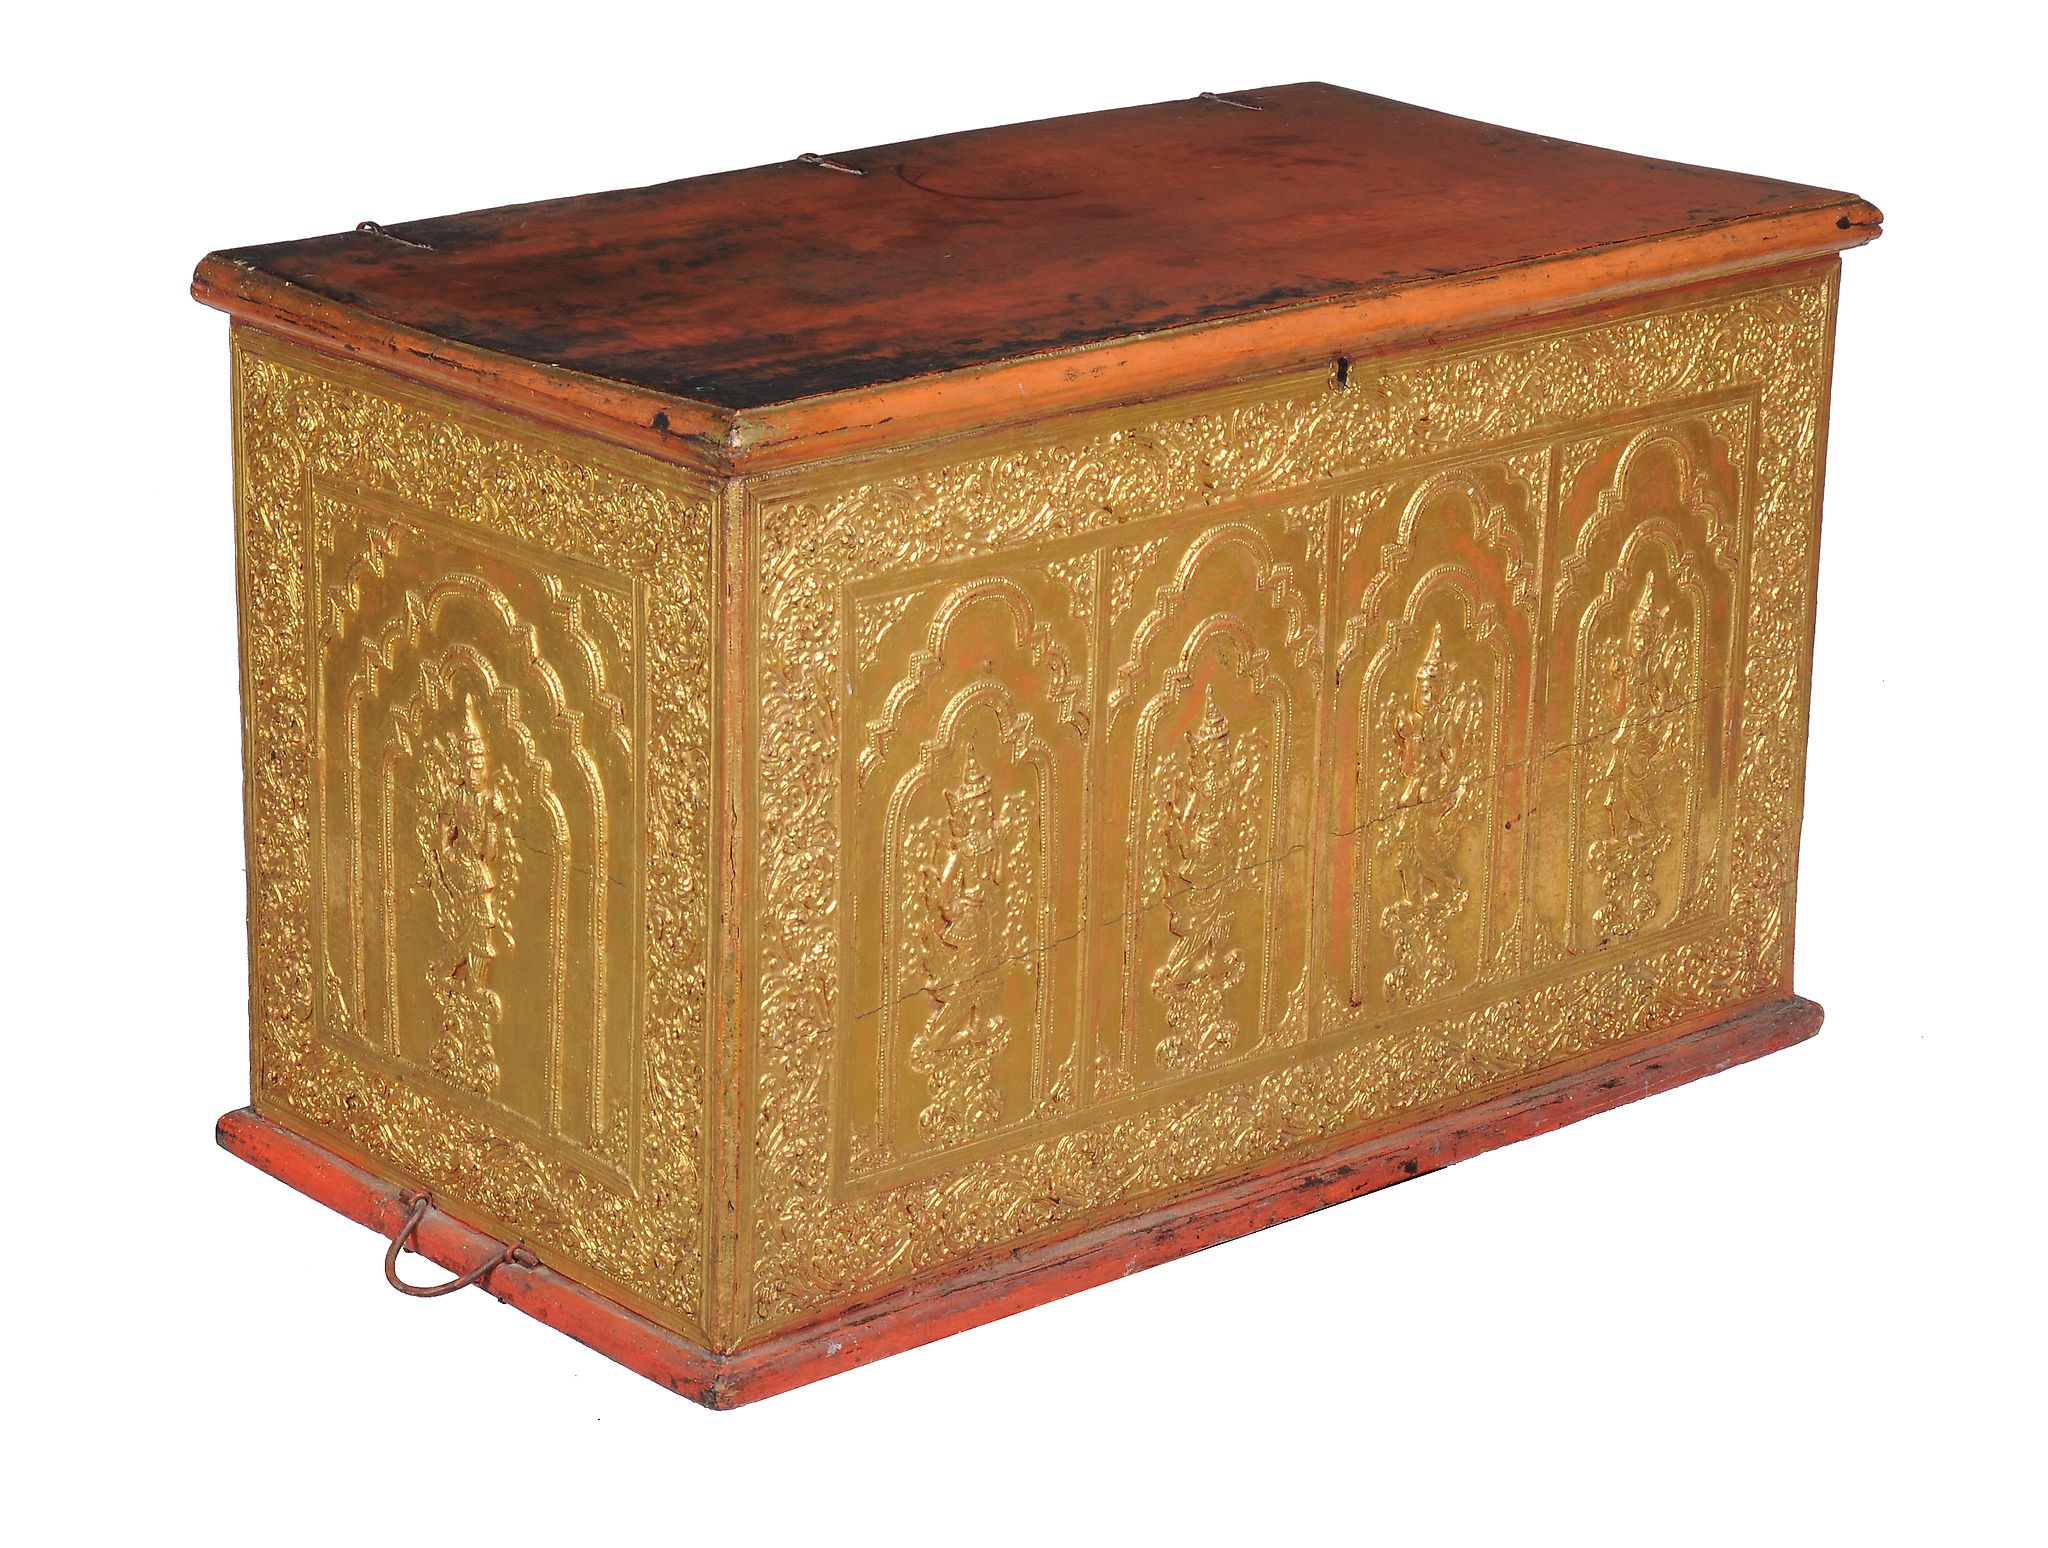 A Siamese red lacquered and gilt hardwood coffer , 74cm high, 120cm wide, 65cm deep